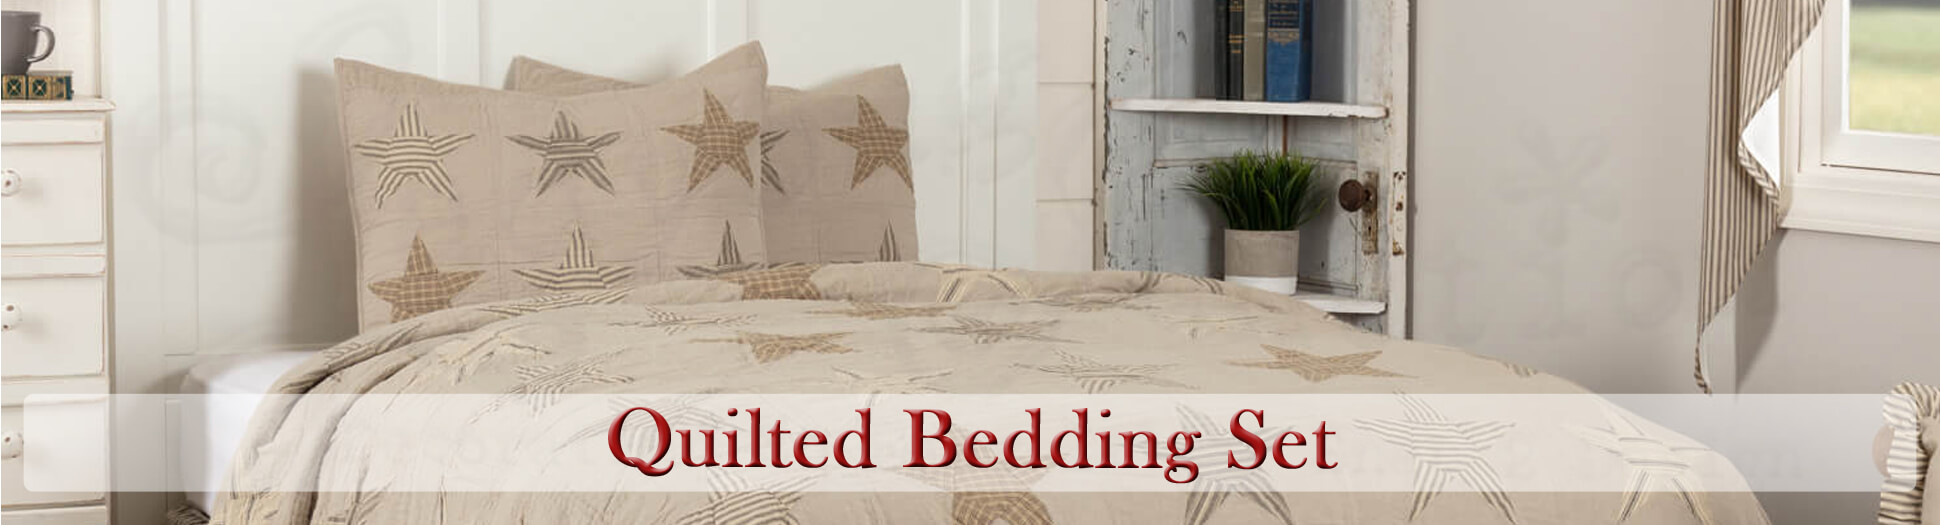 Quilted Bedding Sets